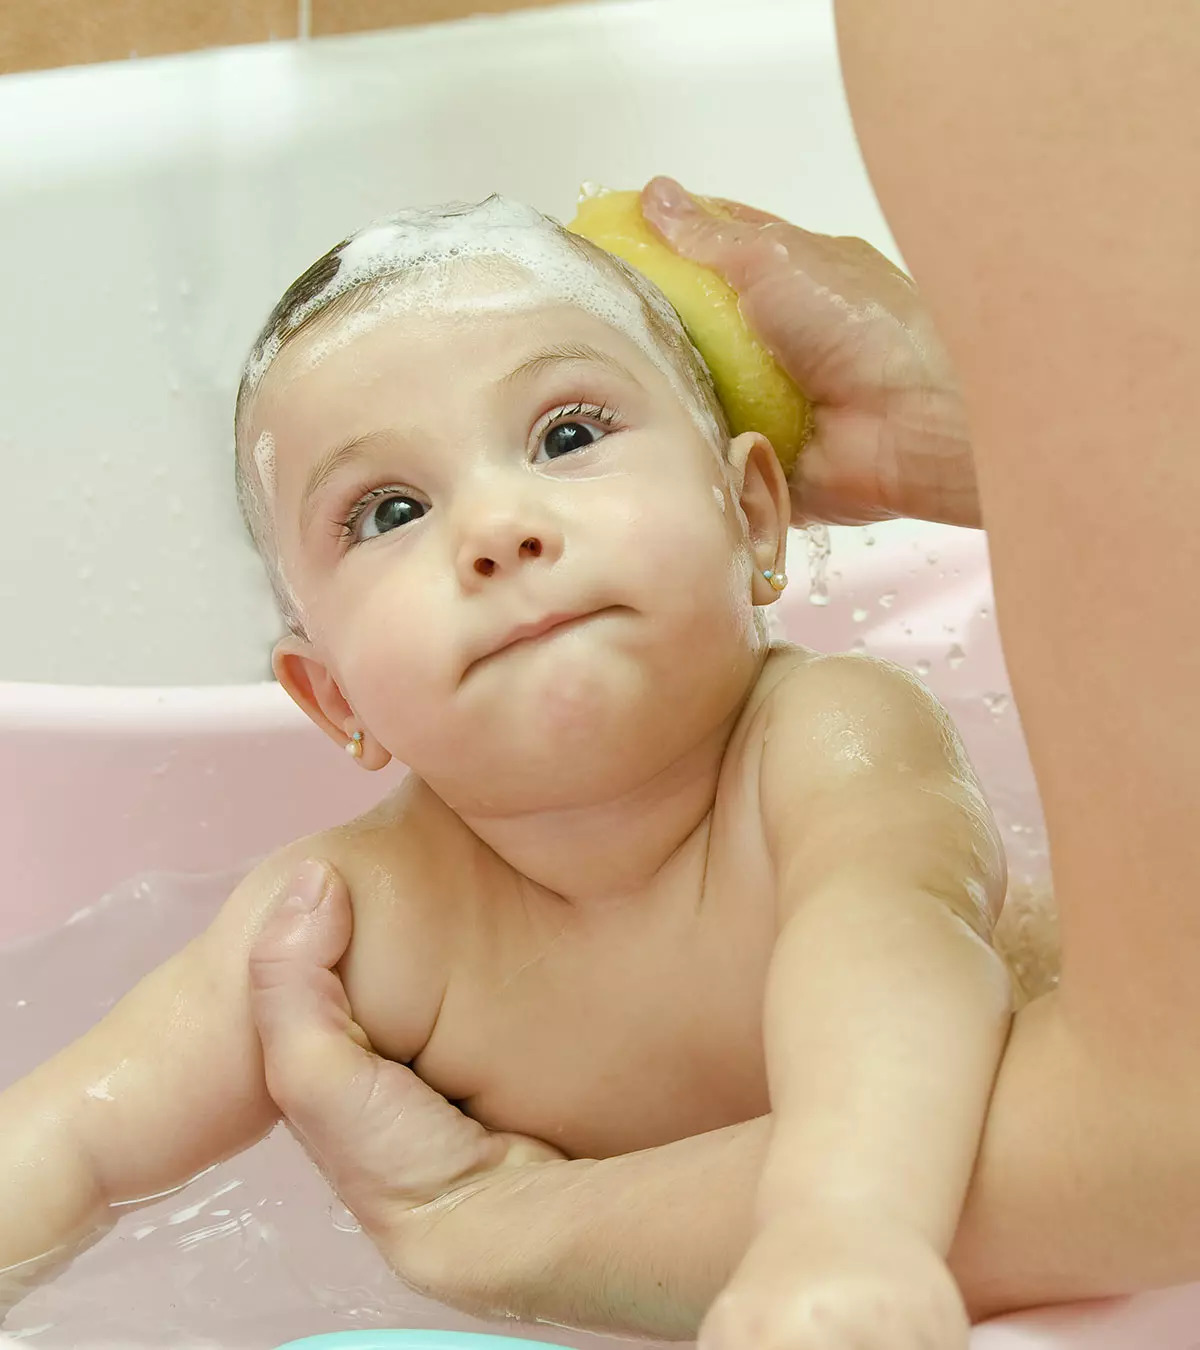 How To Give Your Baby Bunny A Bath : Rabbit Bath Videos Are Actually The Opposite Of Cute - The ... - Bathing your newborn can be a fun activity to help you bond with baby.